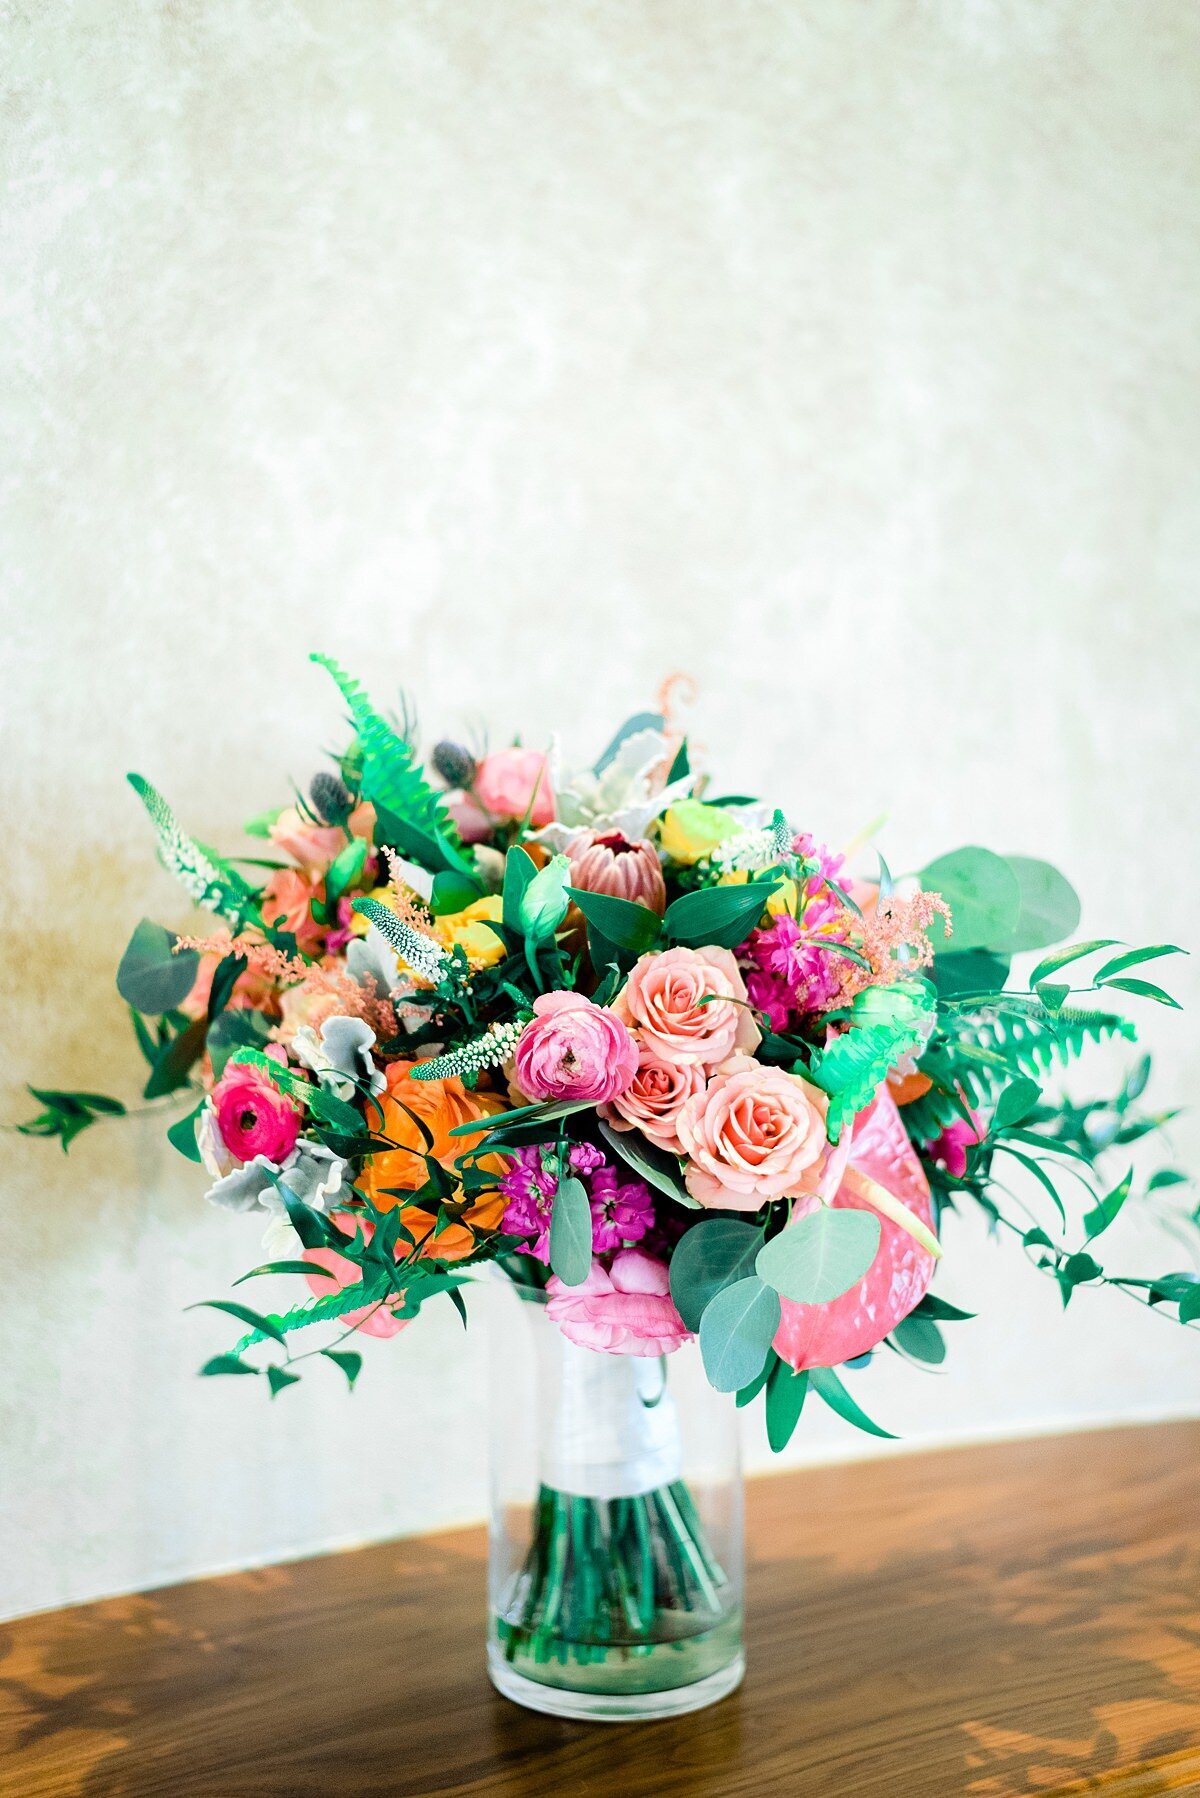 Vibrant colorful bride bouquet of pinks, oranges and eucalyptus sitting in a vase